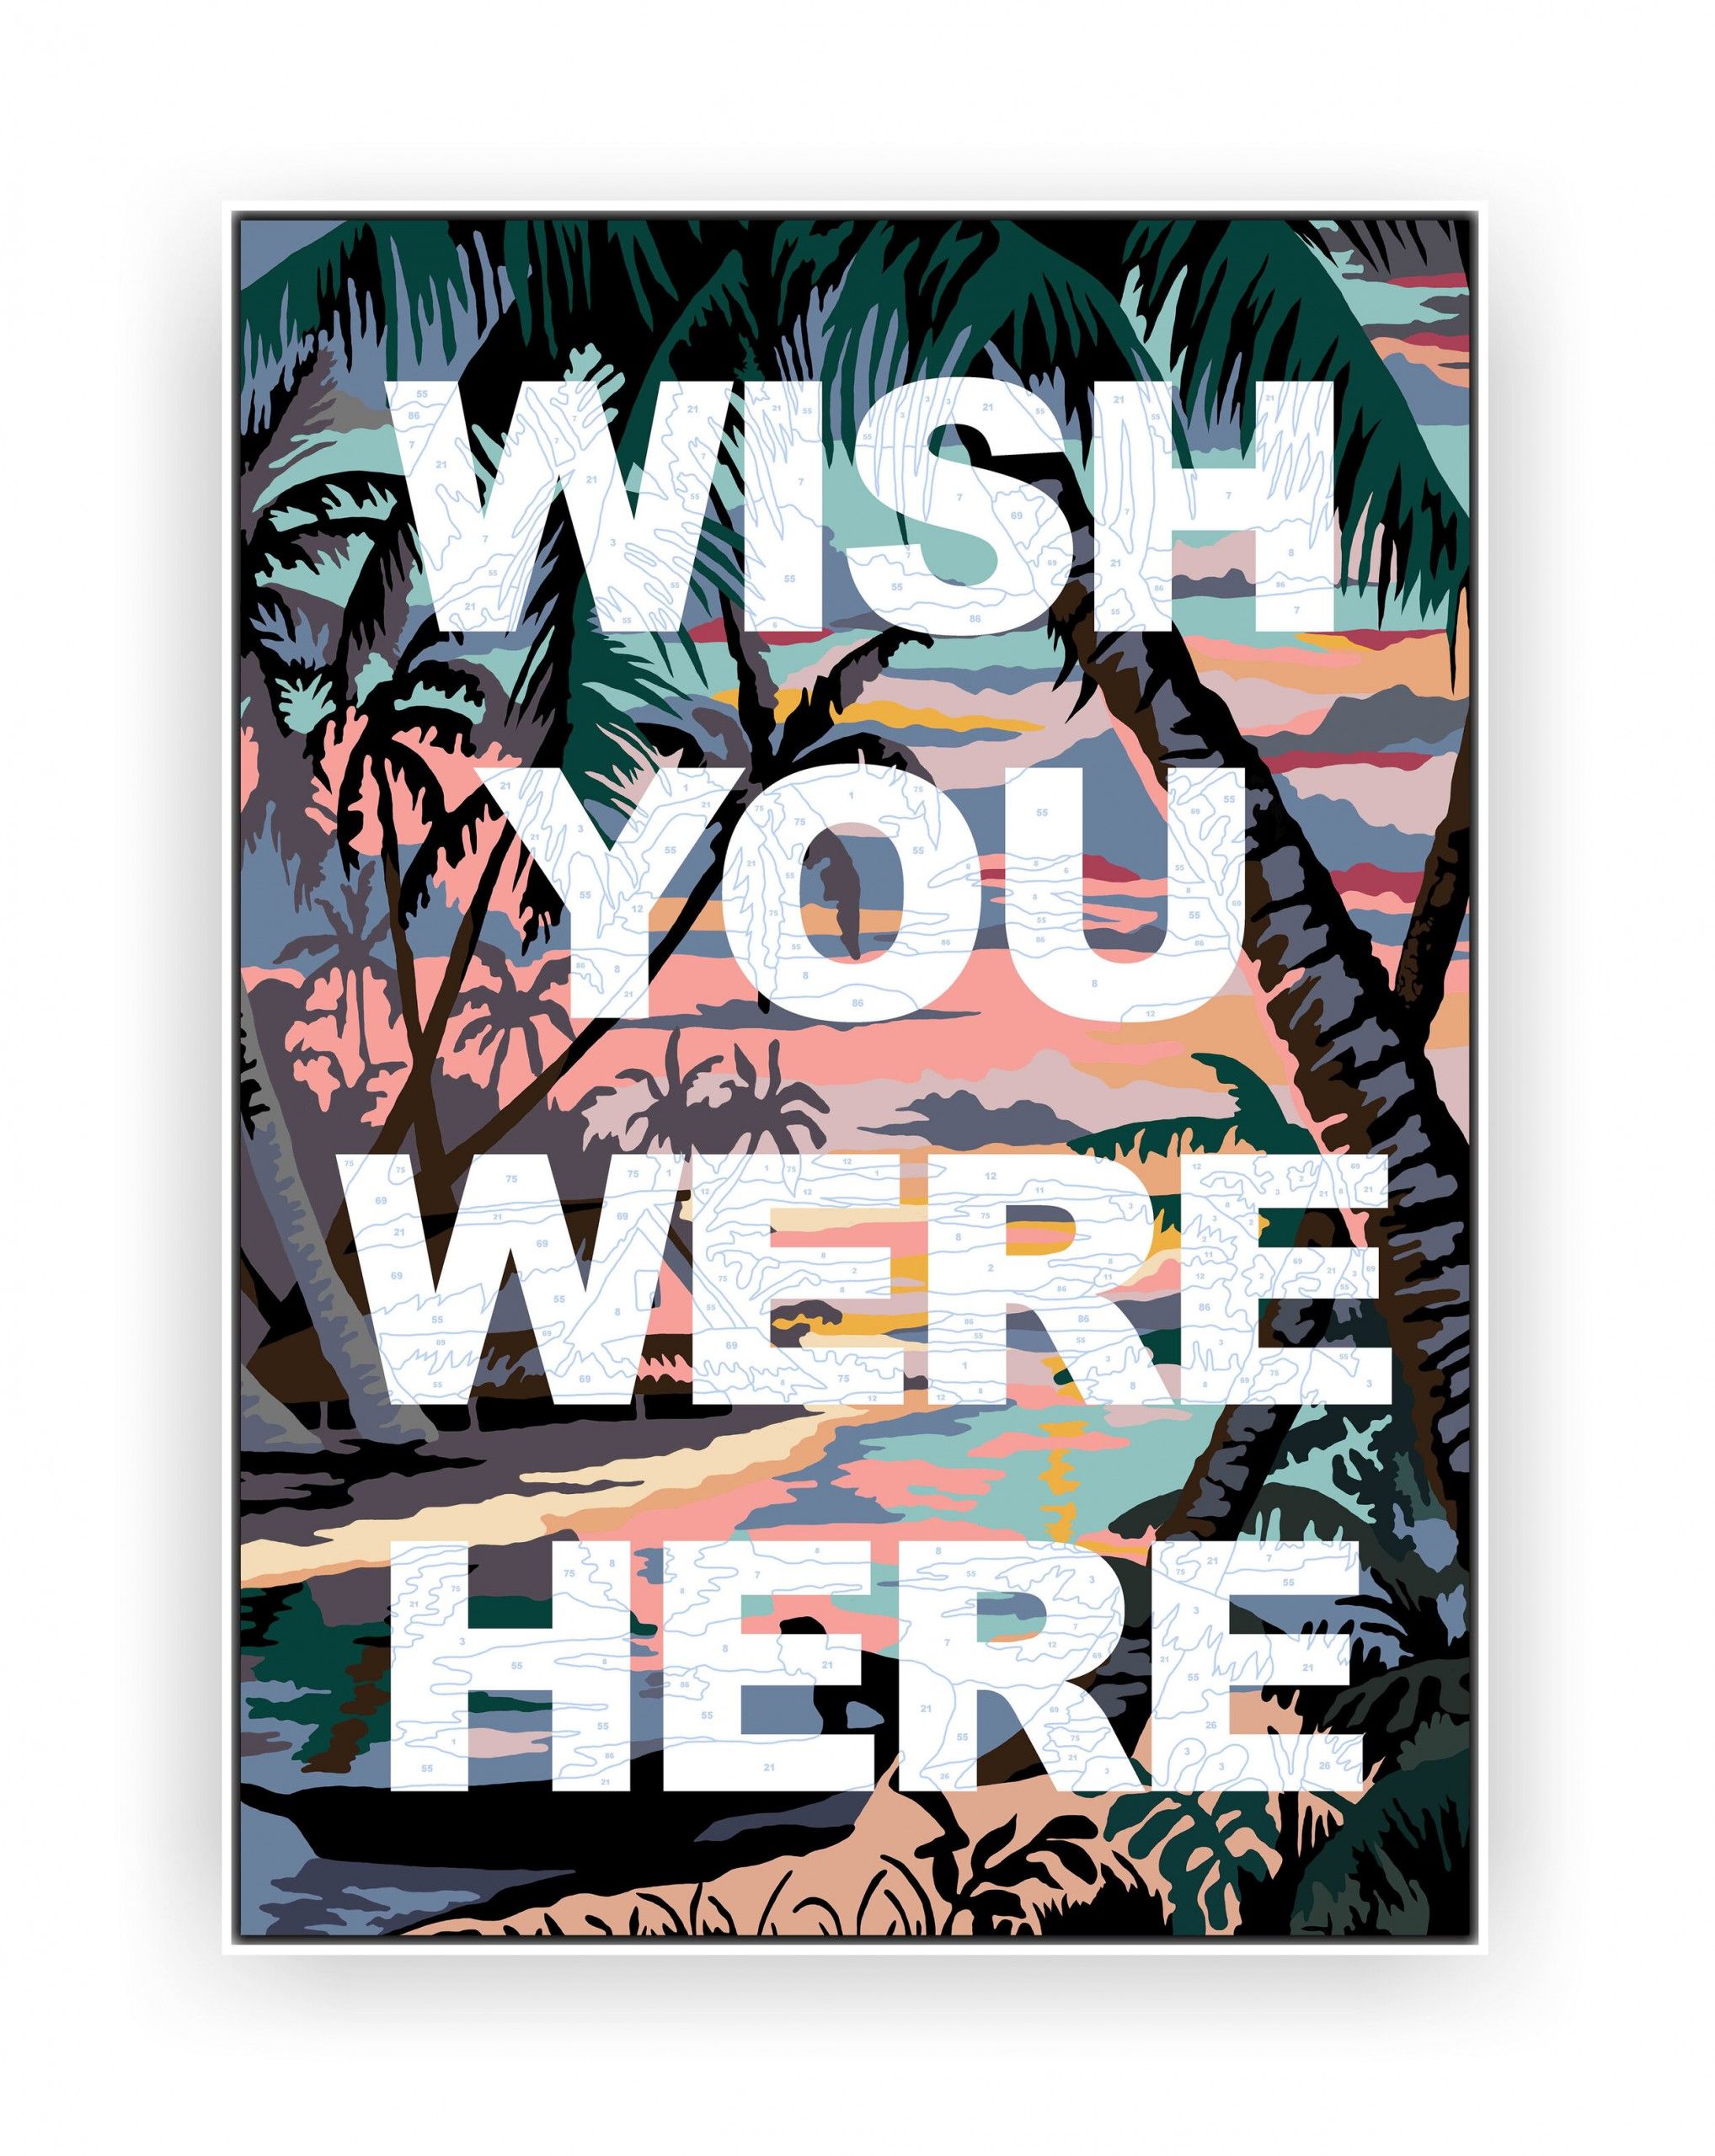 Wish you were here by Benjamin Thomas Taylor